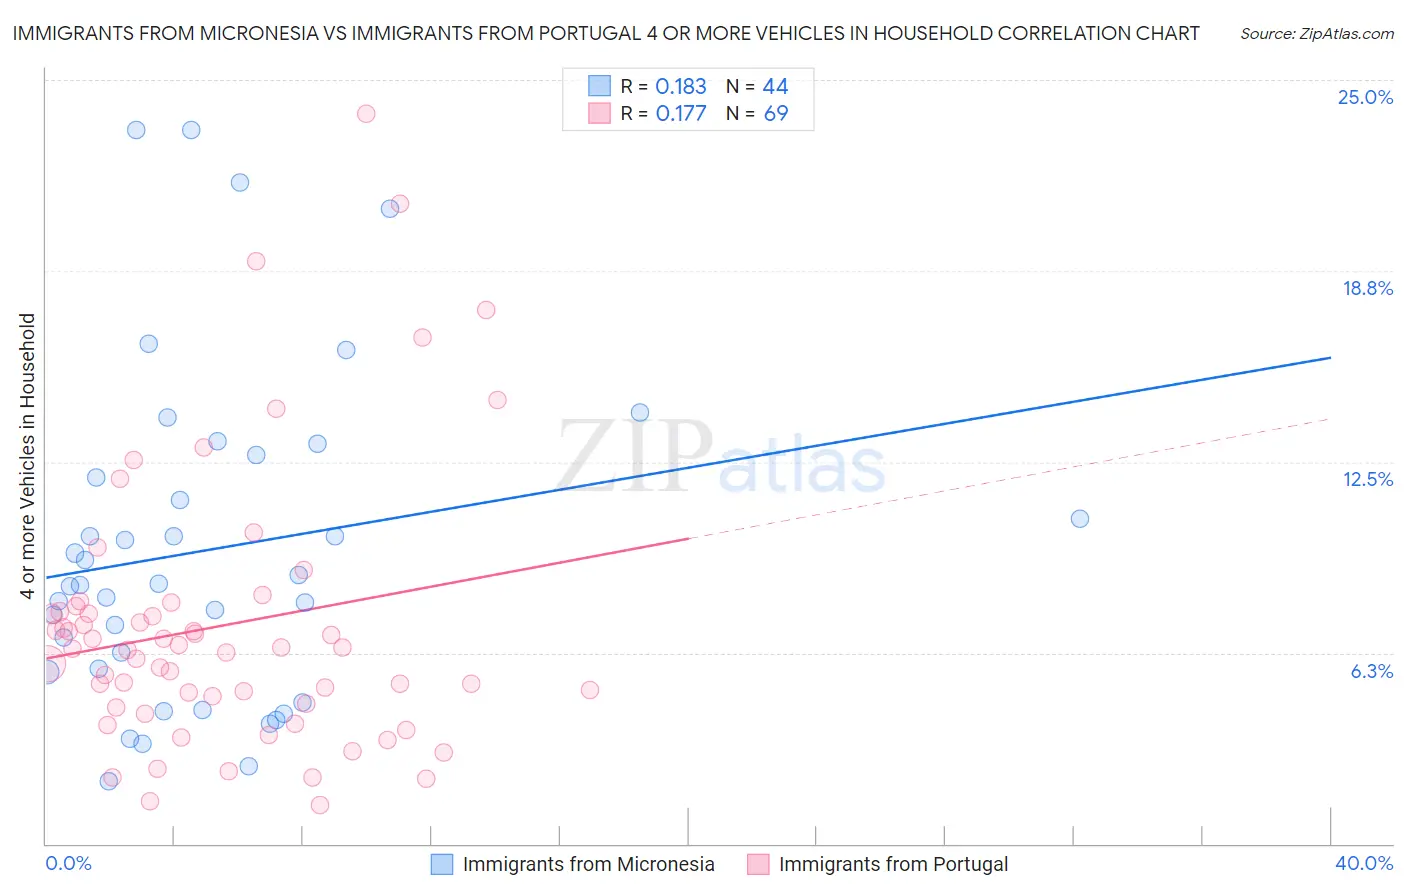 Immigrants from Micronesia vs Immigrants from Portugal 4 or more Vehicles in Household